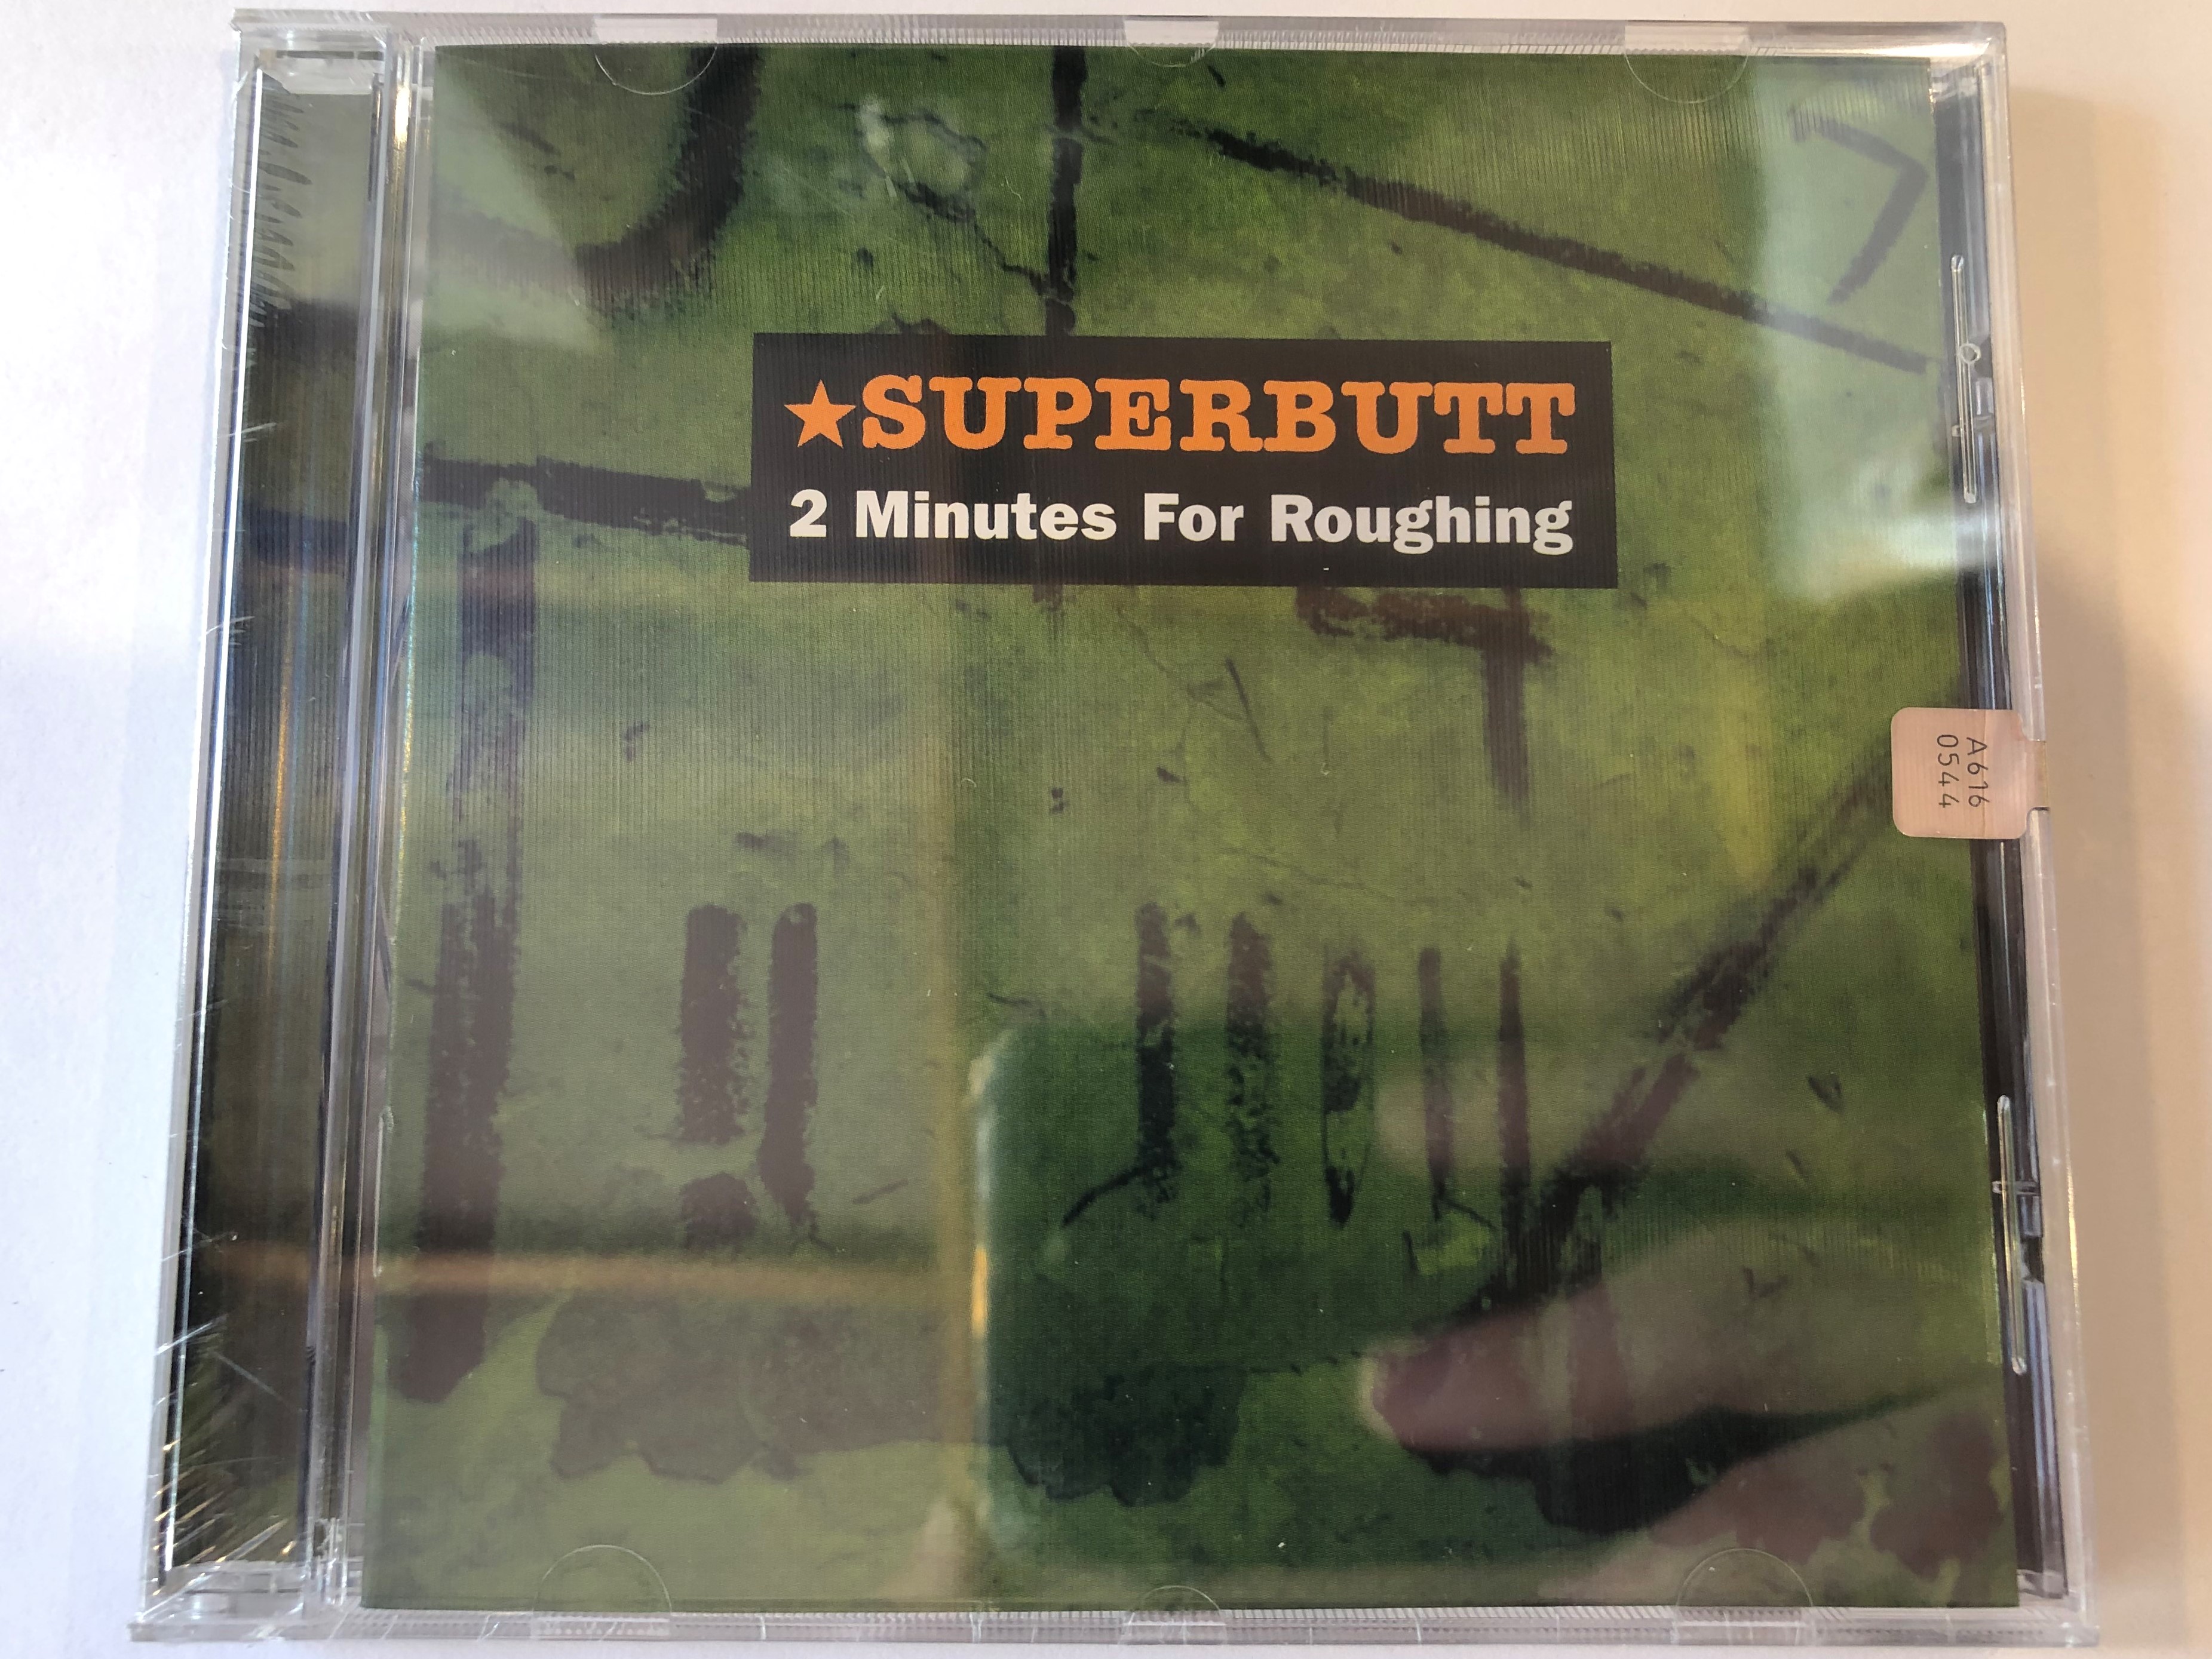 superbutt-2-minutes-for-roughing-magneoton-audio-cd-2001-685738888320-1-.jpg